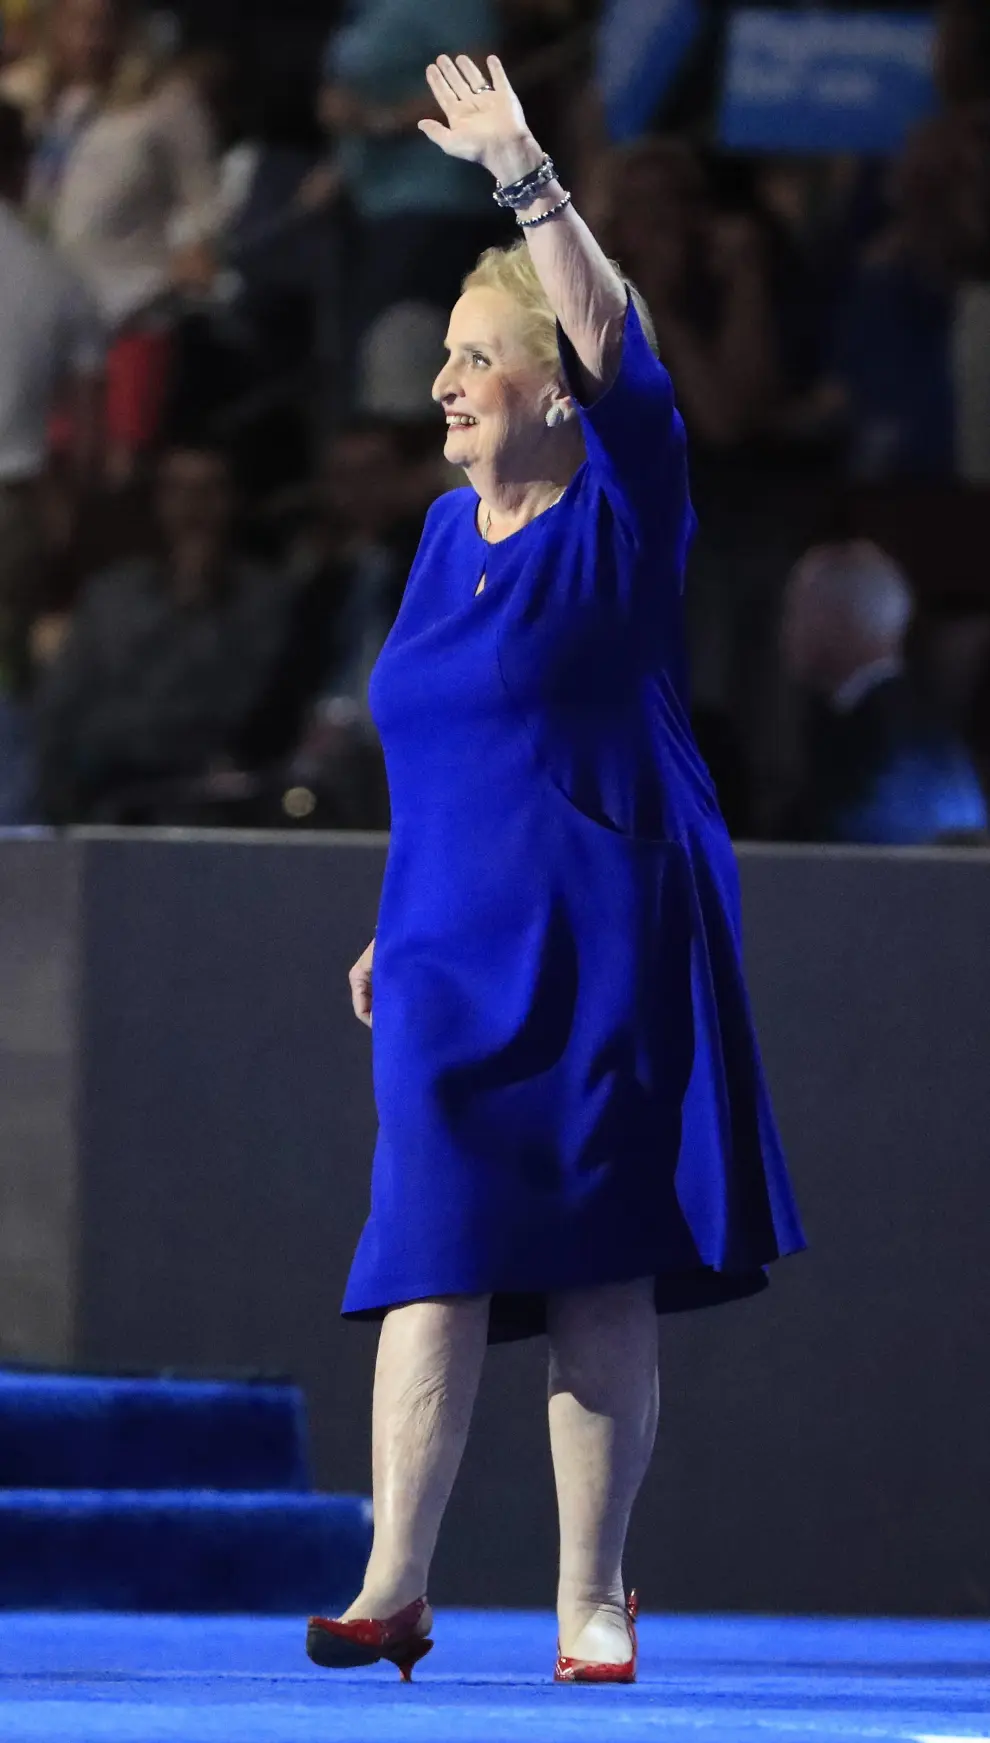 Philadelphia (United States), 27/07/2016.- (FILE) - Former United States Secretary of State Madeleine Albright gestures after speaking on the second day of the Democratic National Convention at the Wells Fargo Center in Philadelphia, Pennsylvania, USA, 26 July 2016 (Reissued 23 March 2022). Former US Secretary of State Madeleine Albright died at the age of 84 on 23 March 2022. Albright was appointed by Former US President Bill Clinton during his second term to become the first woman in US history to head the State department. (Estados Unidos, Filadelfia) EFE/EPA/TANNEN MAURY (FILE) USA OBIT PEOPLE MADELEINE ALBRIGHT